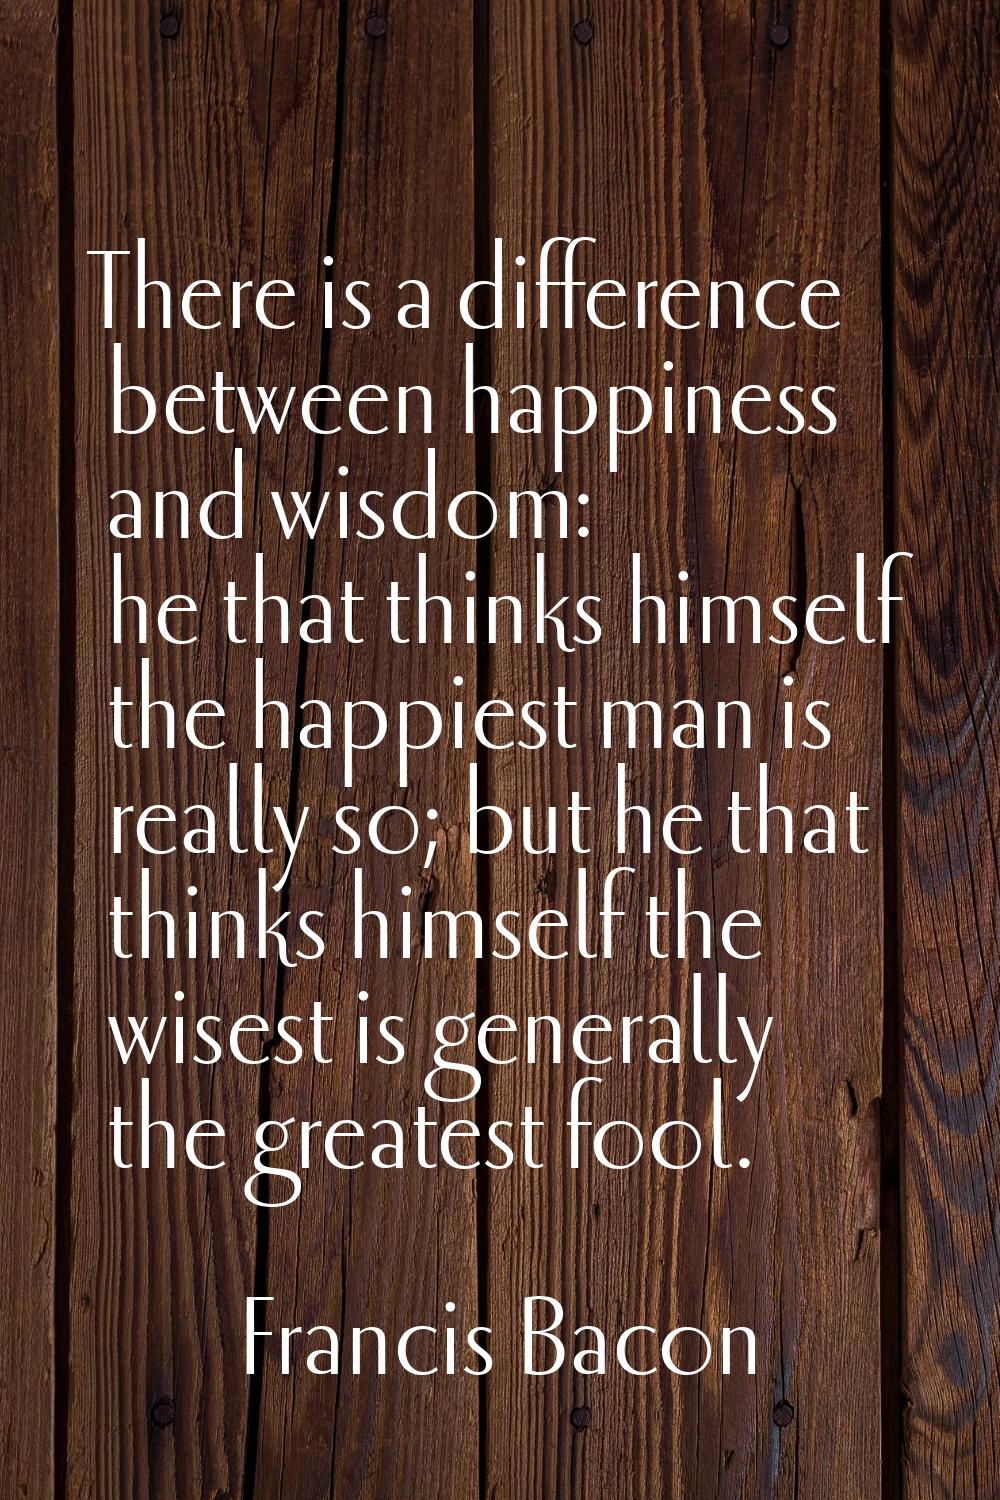 There is a difference between happiness and wisdom: he that thinks himself the happiest man is real